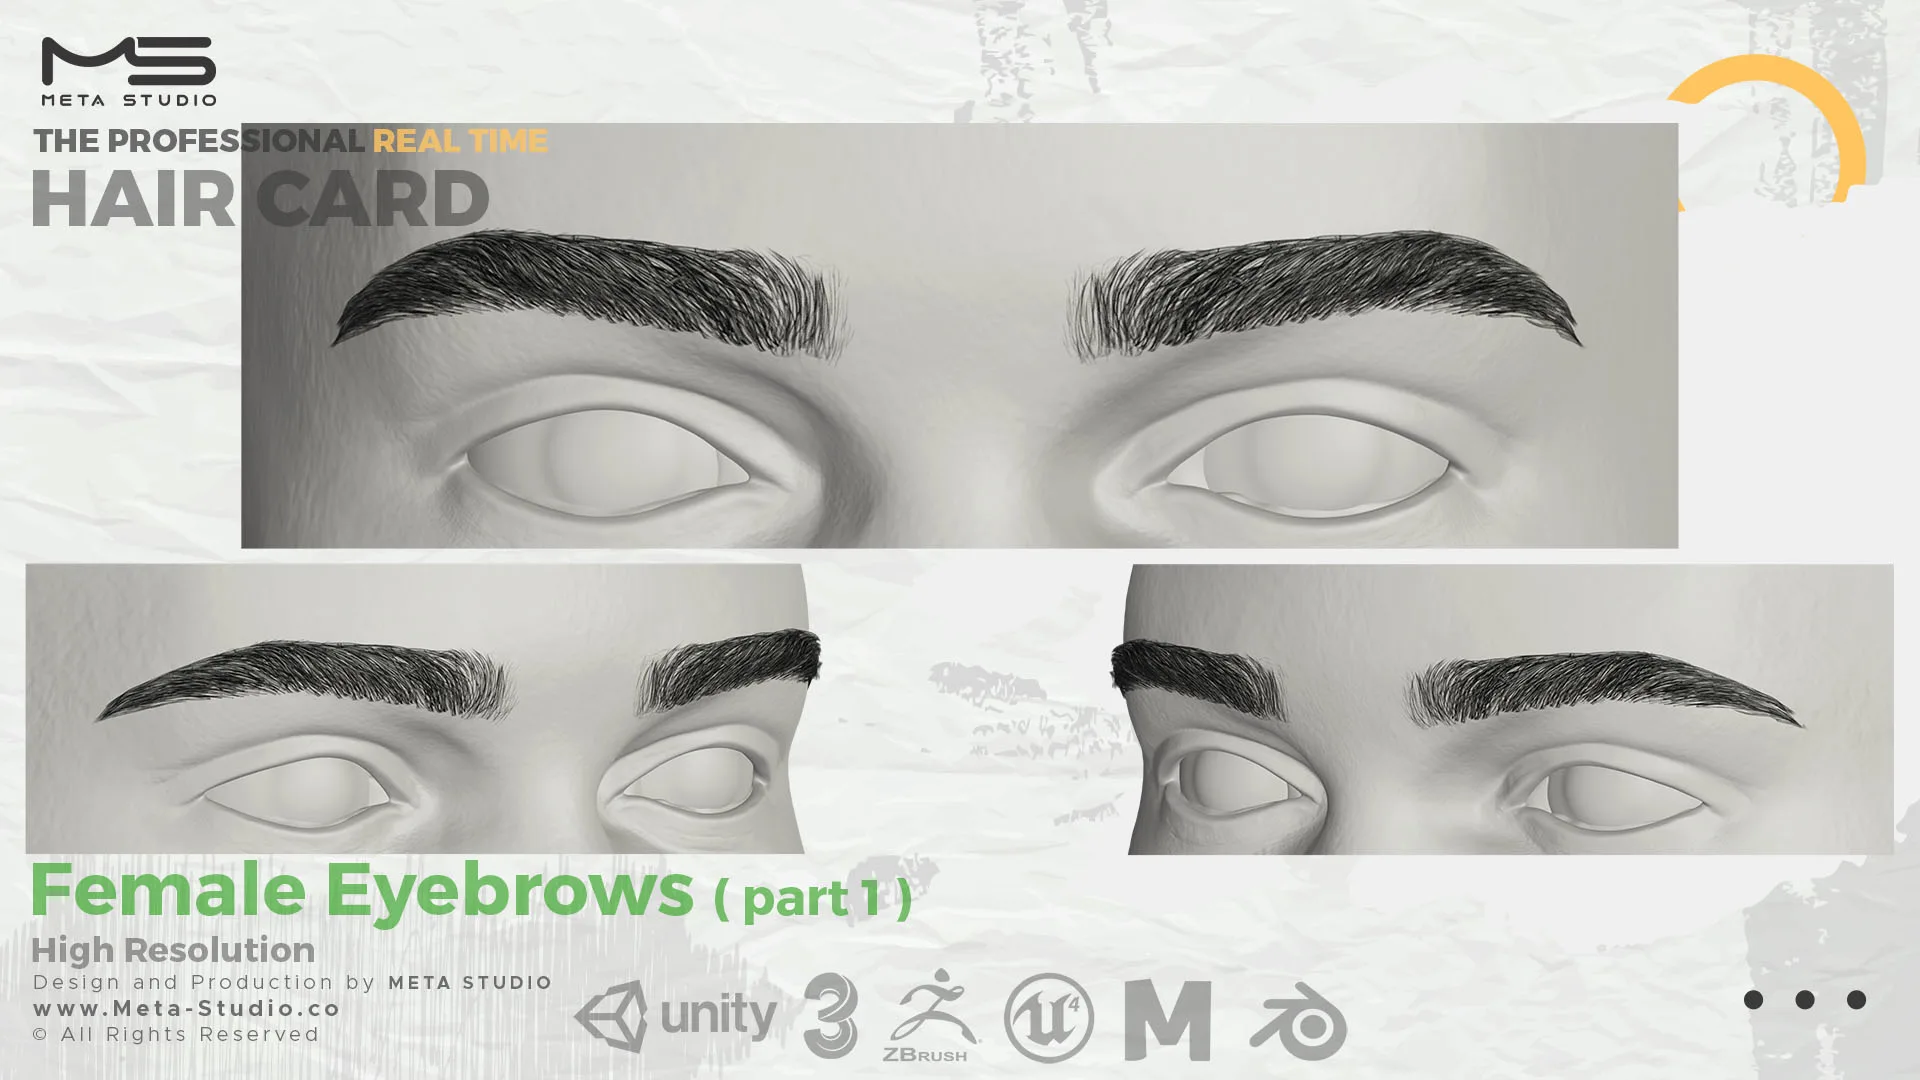 Female Eyebrows Part 1 - Professional Realtime Hair card